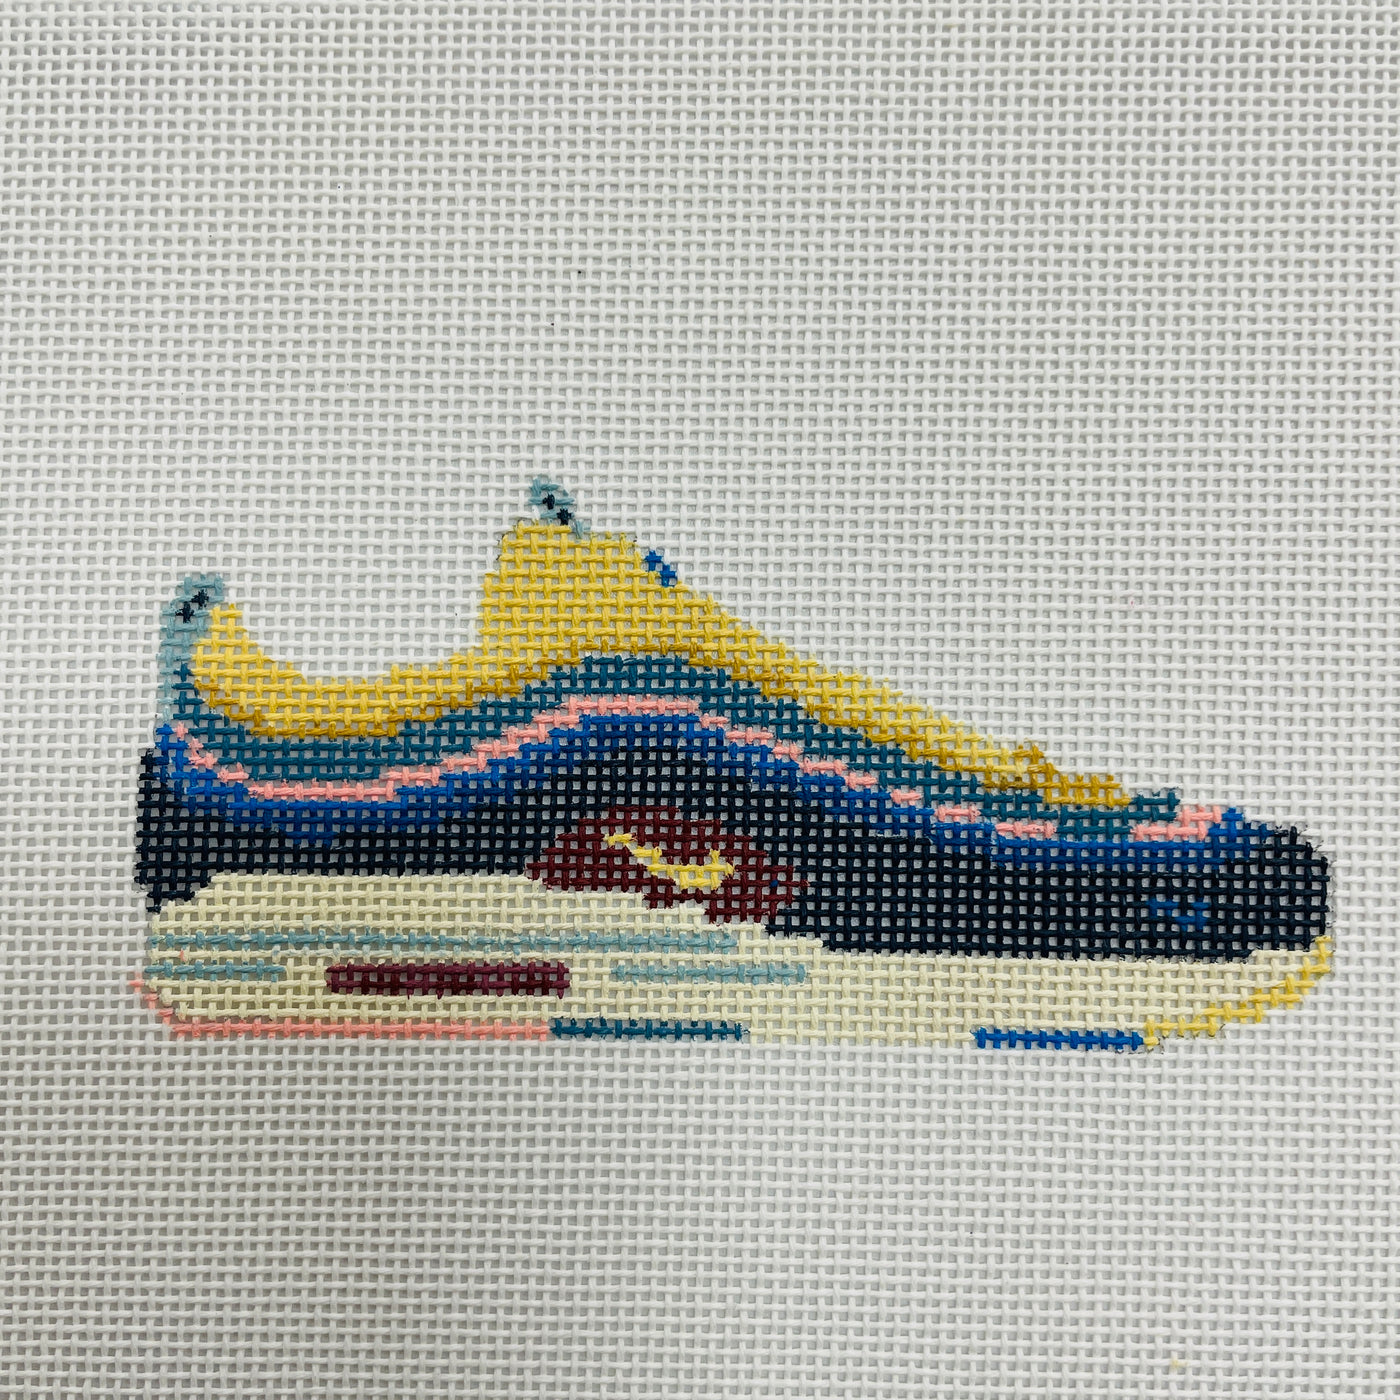 Colorful Sneaker Needlepoint Canvas